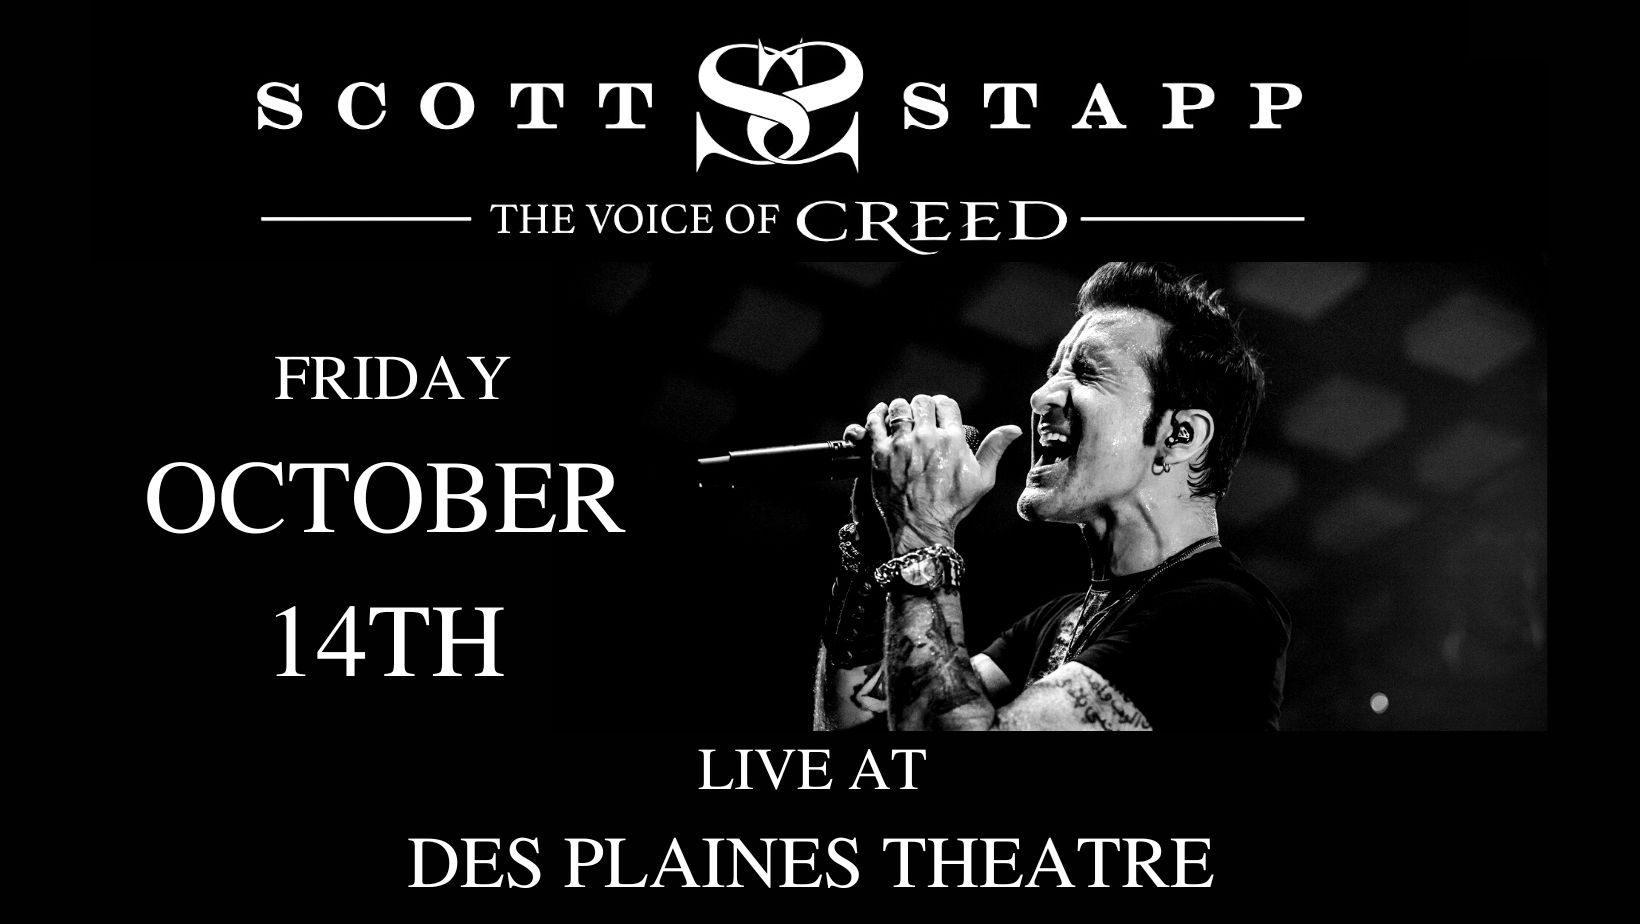 Scott Stapp Voice of Creed Live at The Des Plaines Theatre- Frday, October 14th, Des Plaines, Illinois, United States